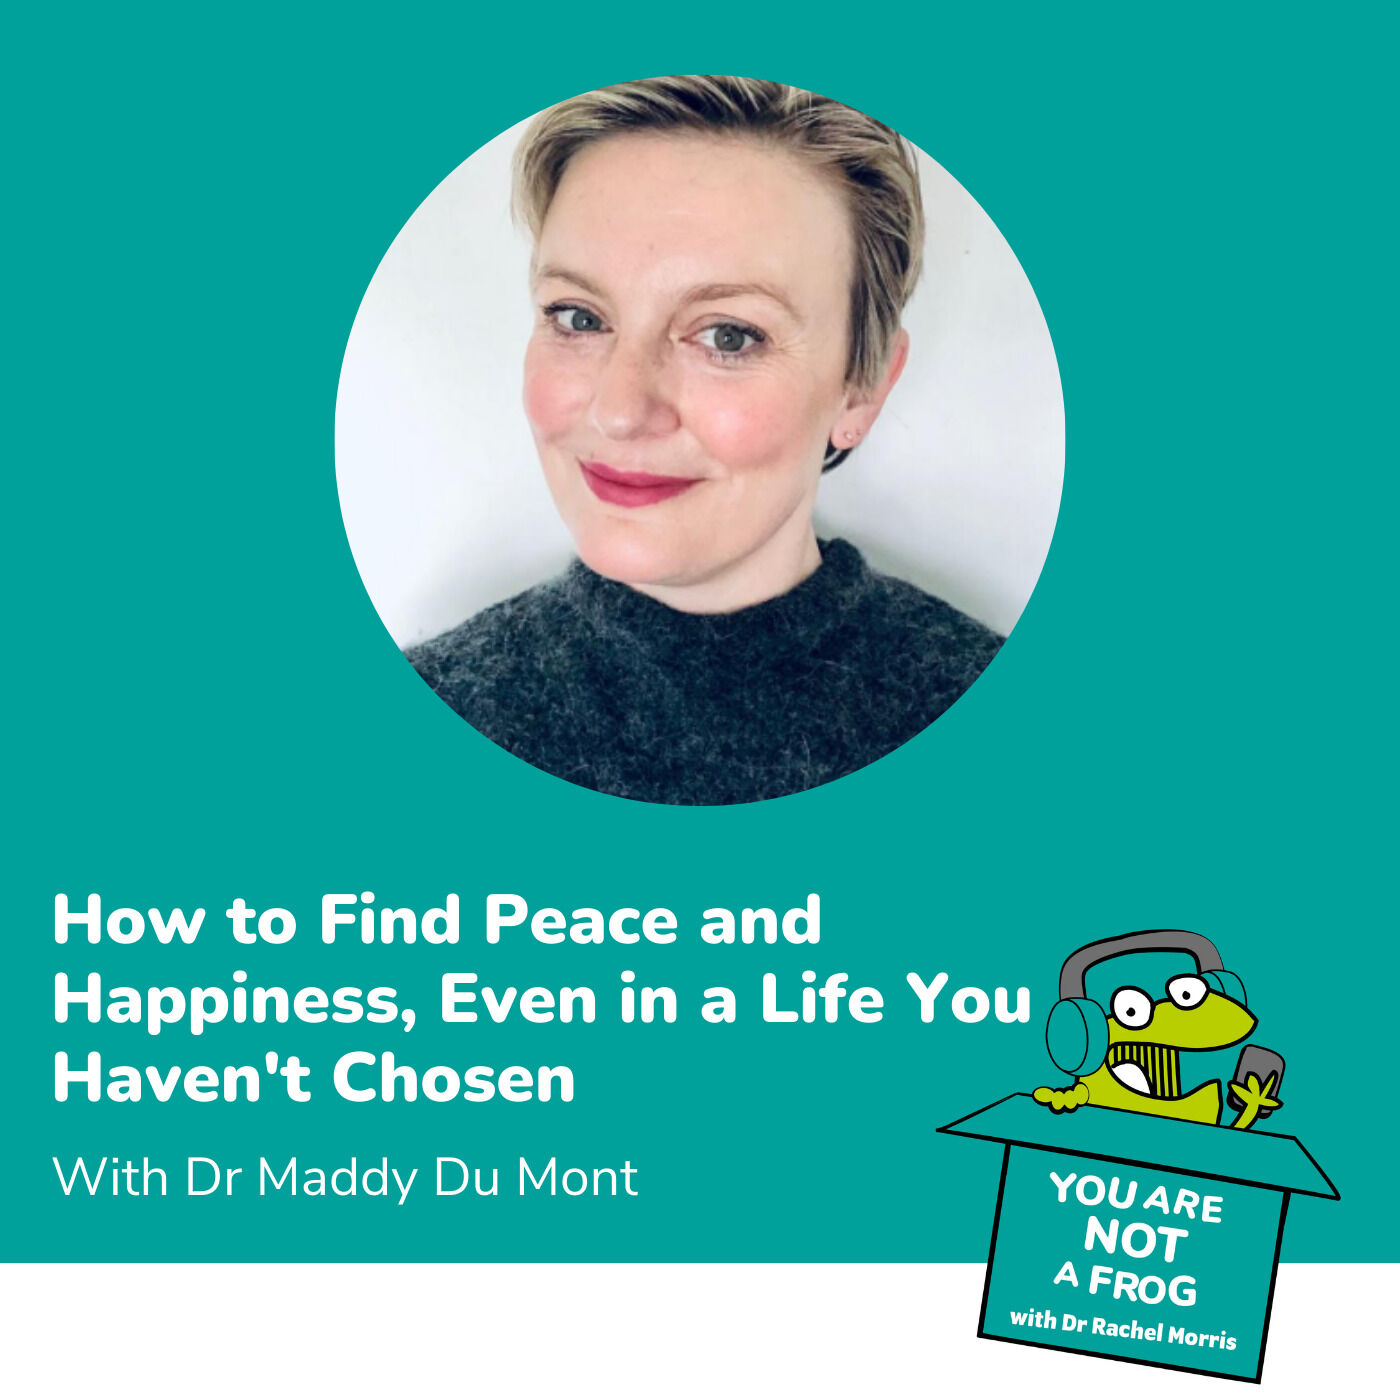 How to Find Peace and Happiness, Even in a Life You Haven’t Chosen